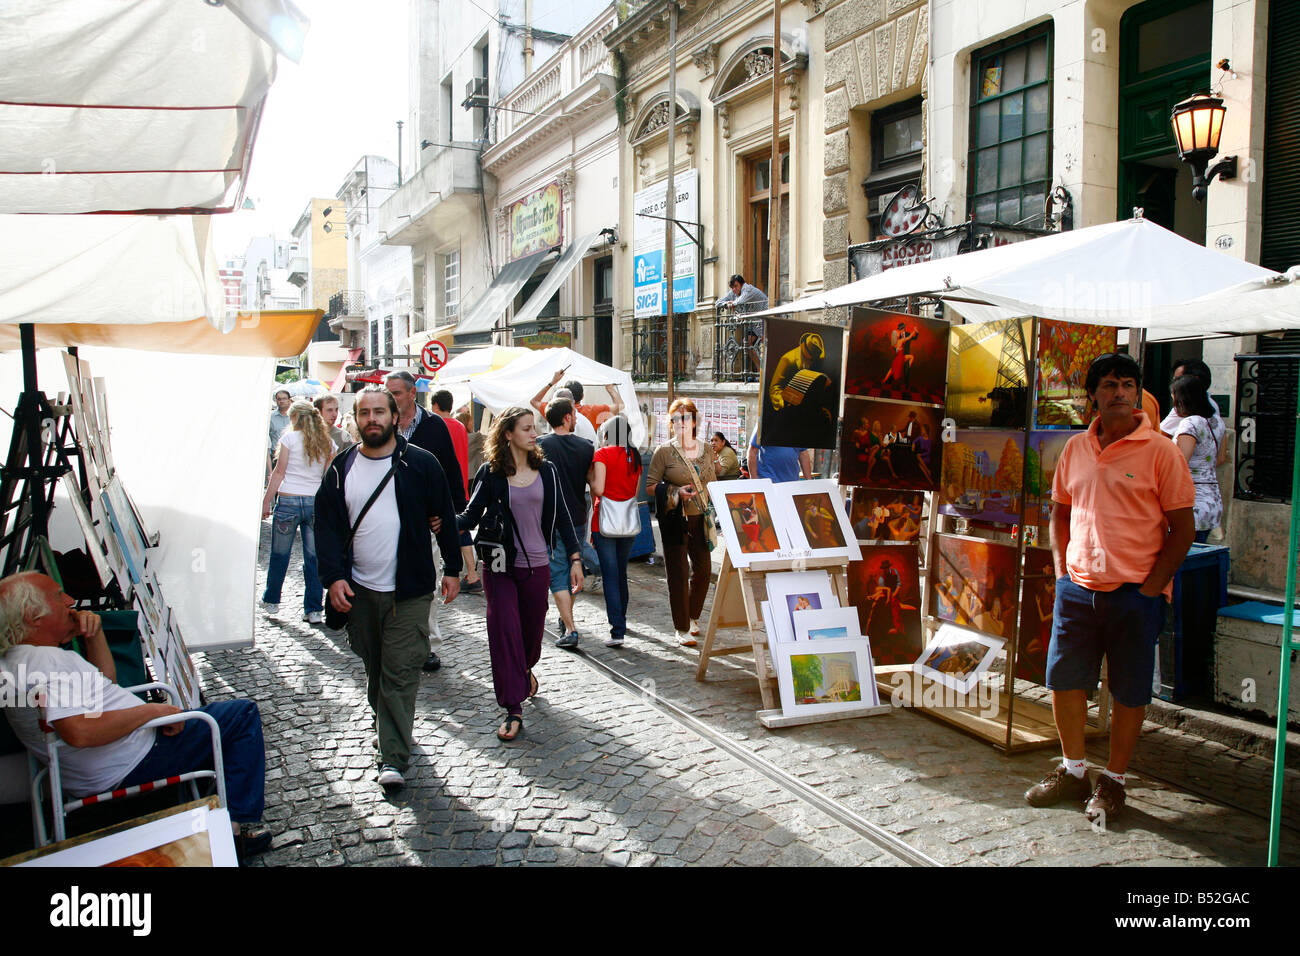 March 2008 - The sunday Market in san telmo Buenos Aires Argentina Stock Photo